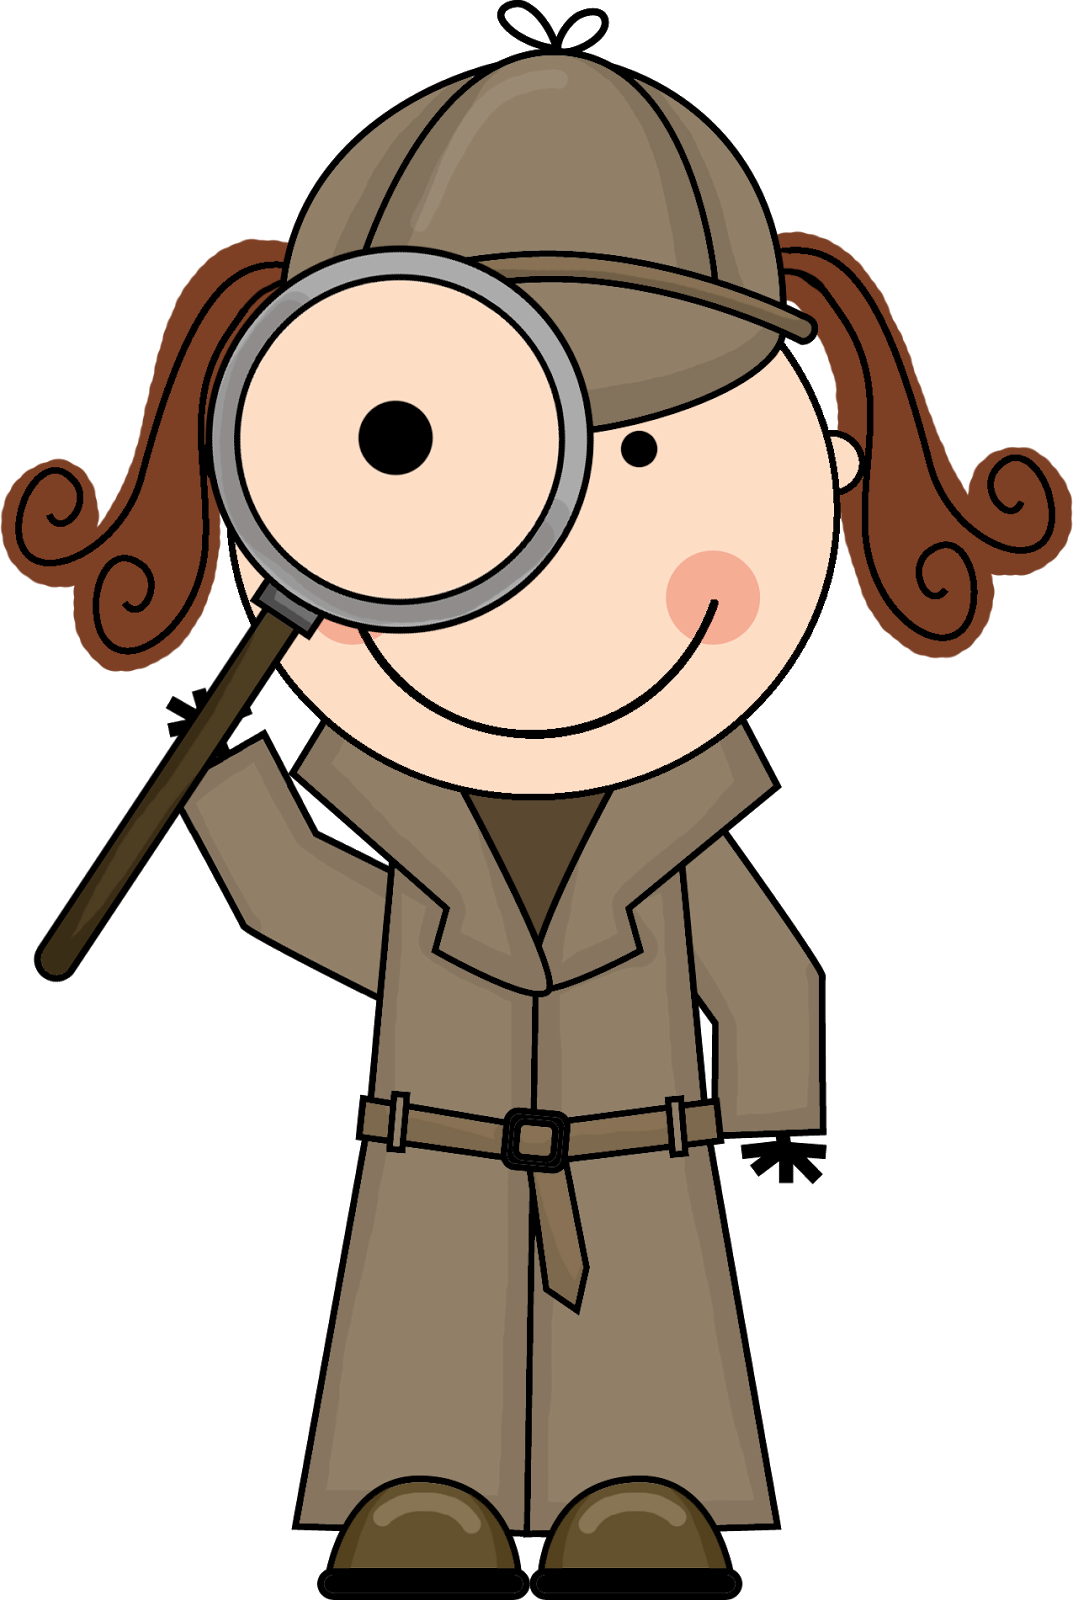 Child With Magnifying Glass Clipart - ClipArt Best